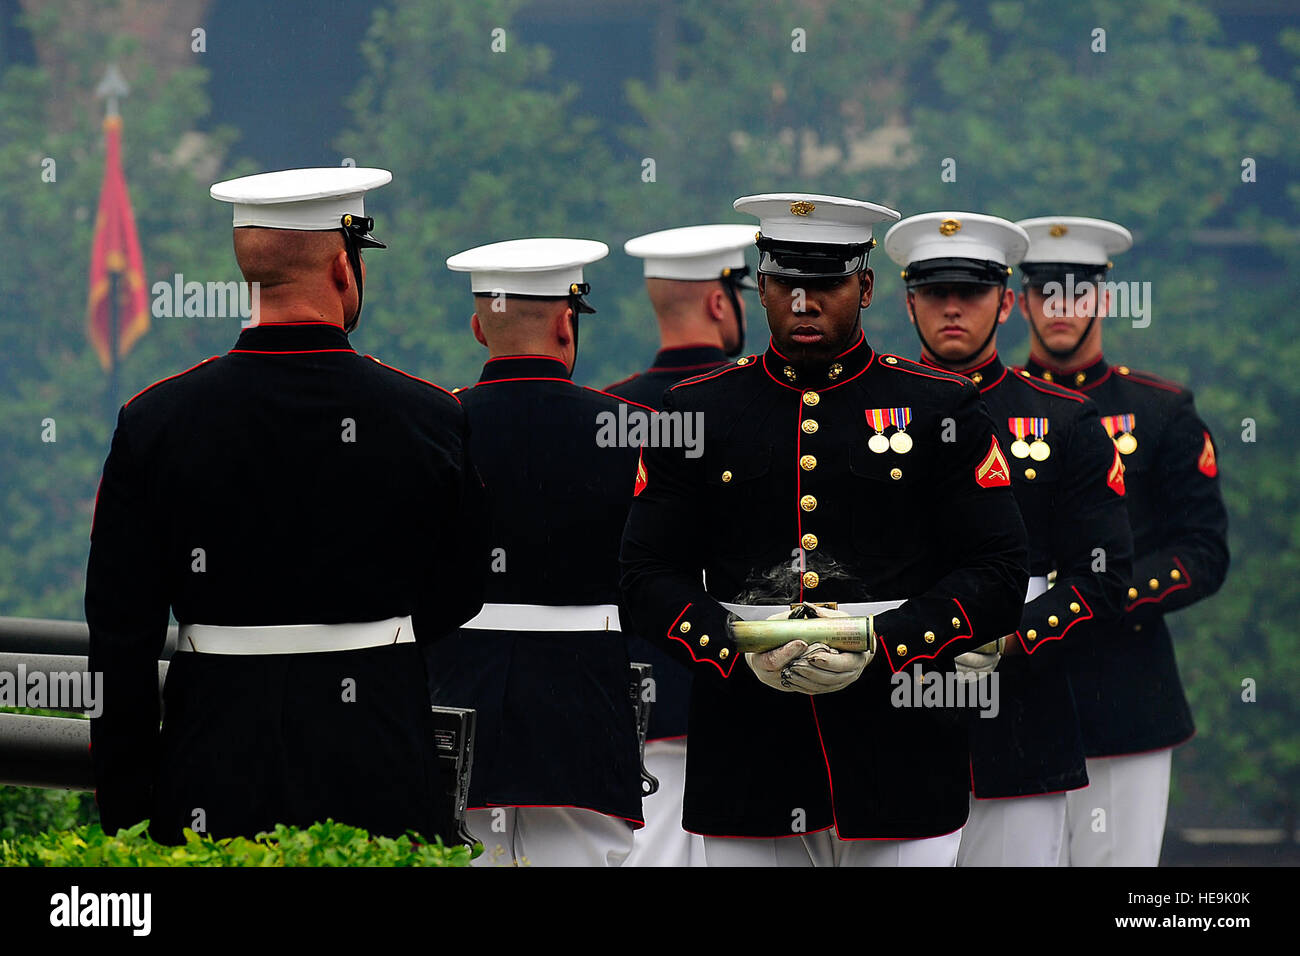 Marines from the Body Bearers Section, Bravo Company, hold the last smoking shells from a saluting battery at the farewell tribute for Joint Chiefs of Staff Vice Chairman Gen. James E. Cartwright at the Marine Corps Barracks, Washington, D.C., Aug. 3, 2011.  Tech. Sgt. Jacob N. Bailey, U.S. Air Force Stock Photo